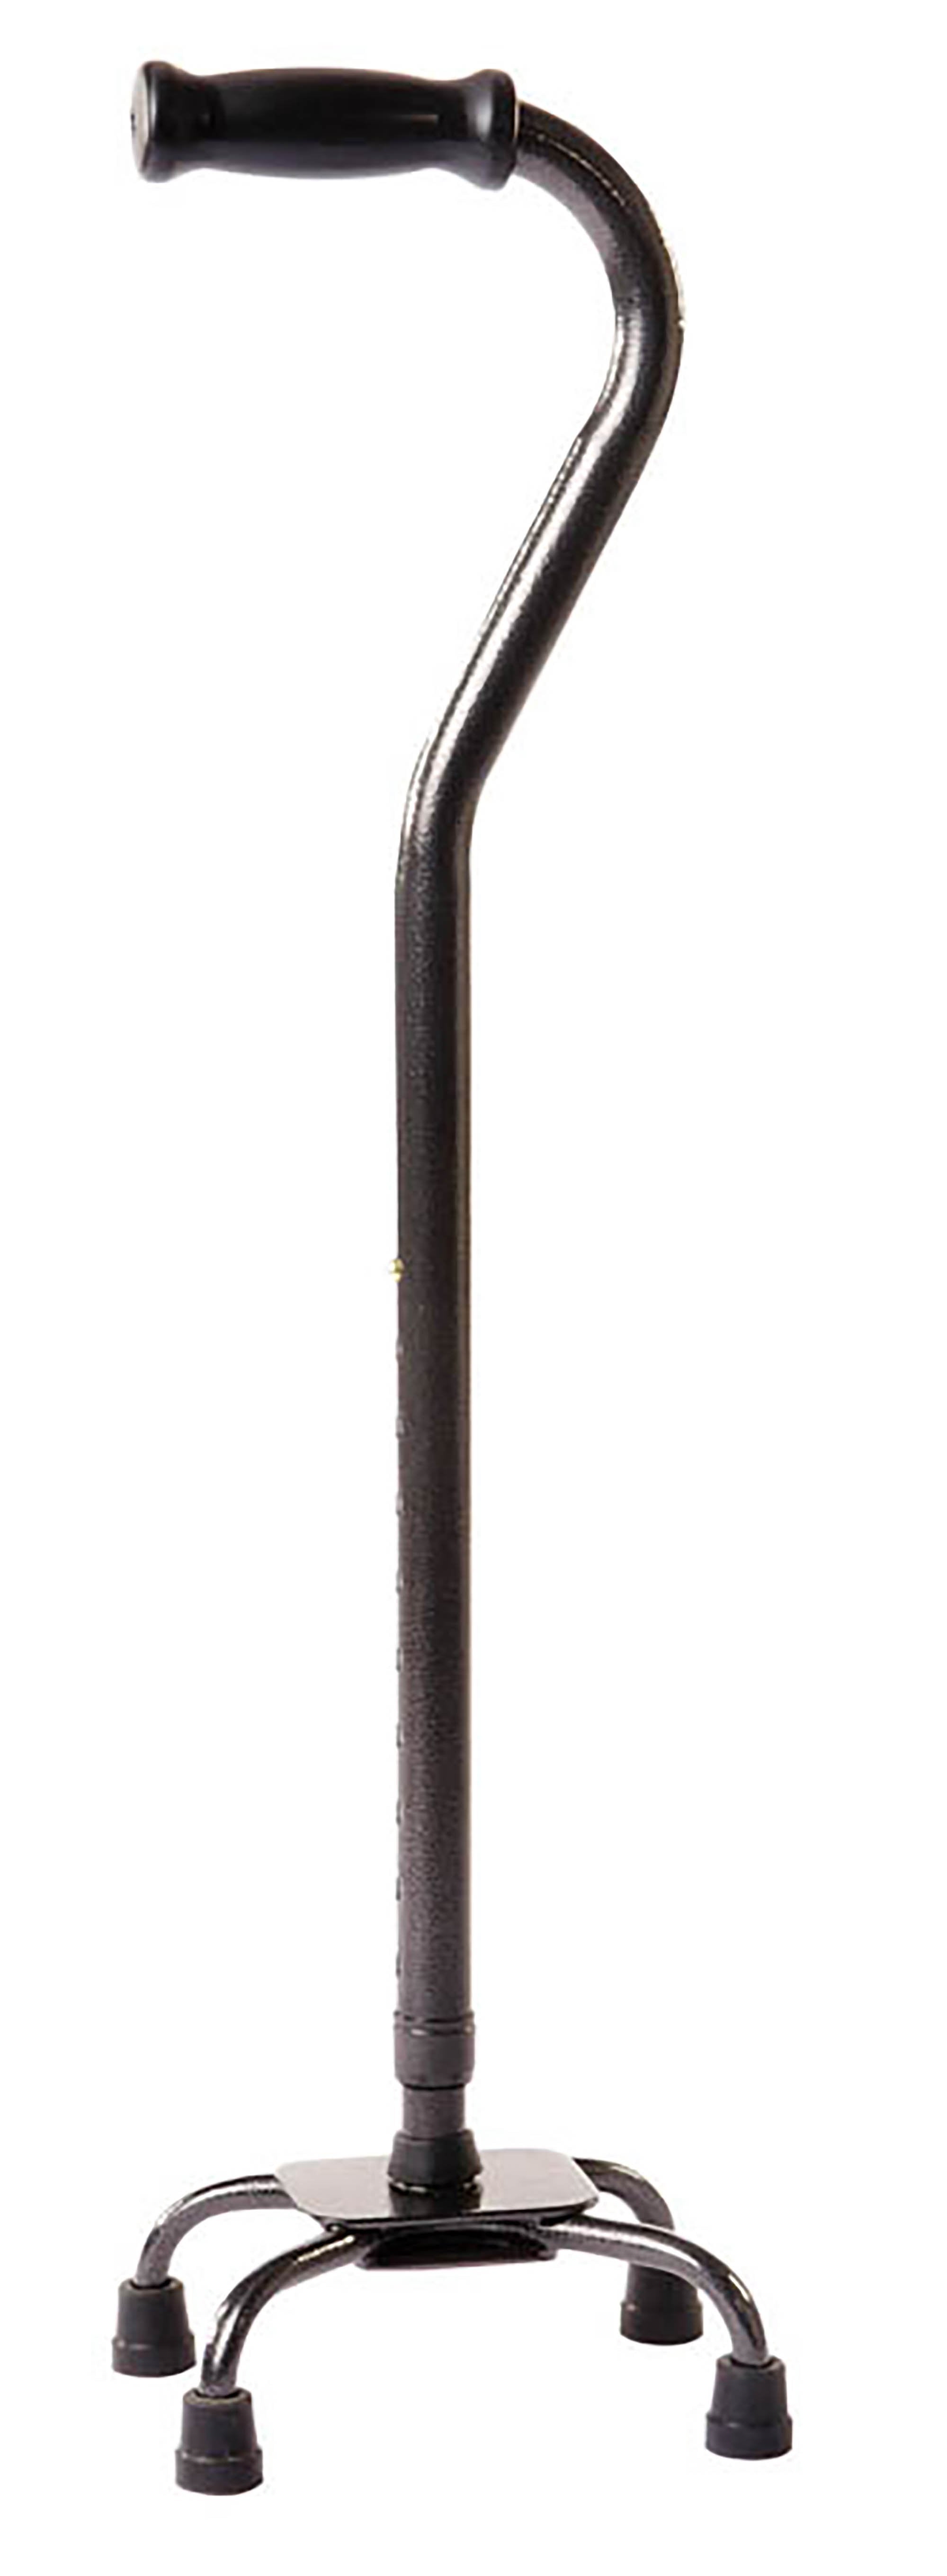 Small Base Quad Cane Carex® Steel 28 to 37 Inch Height Black